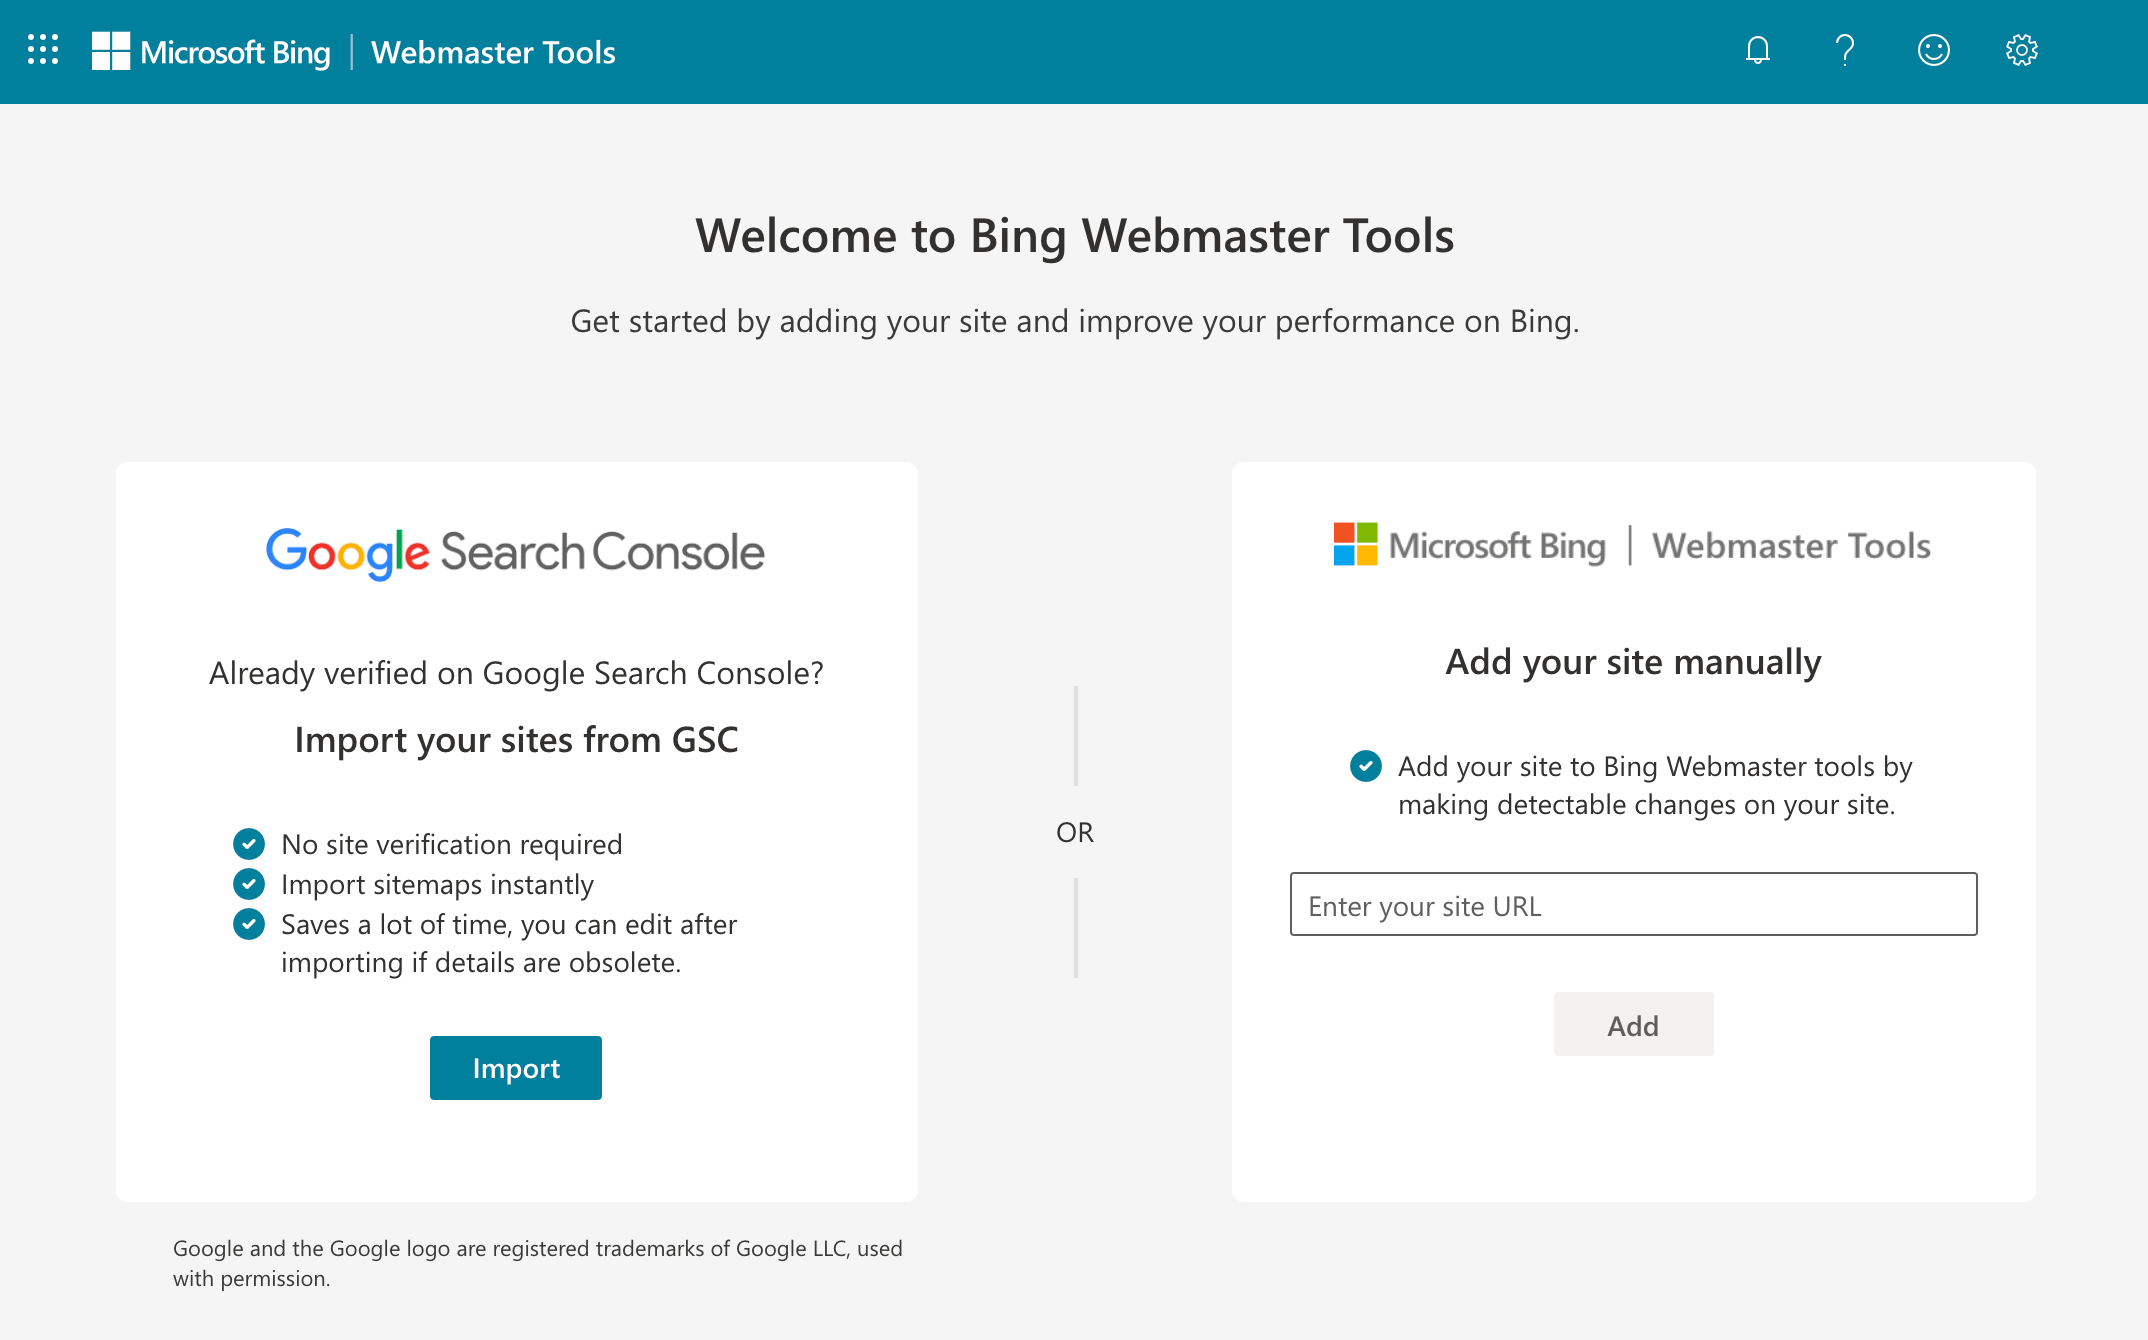 The Bing Webmaster Tools.